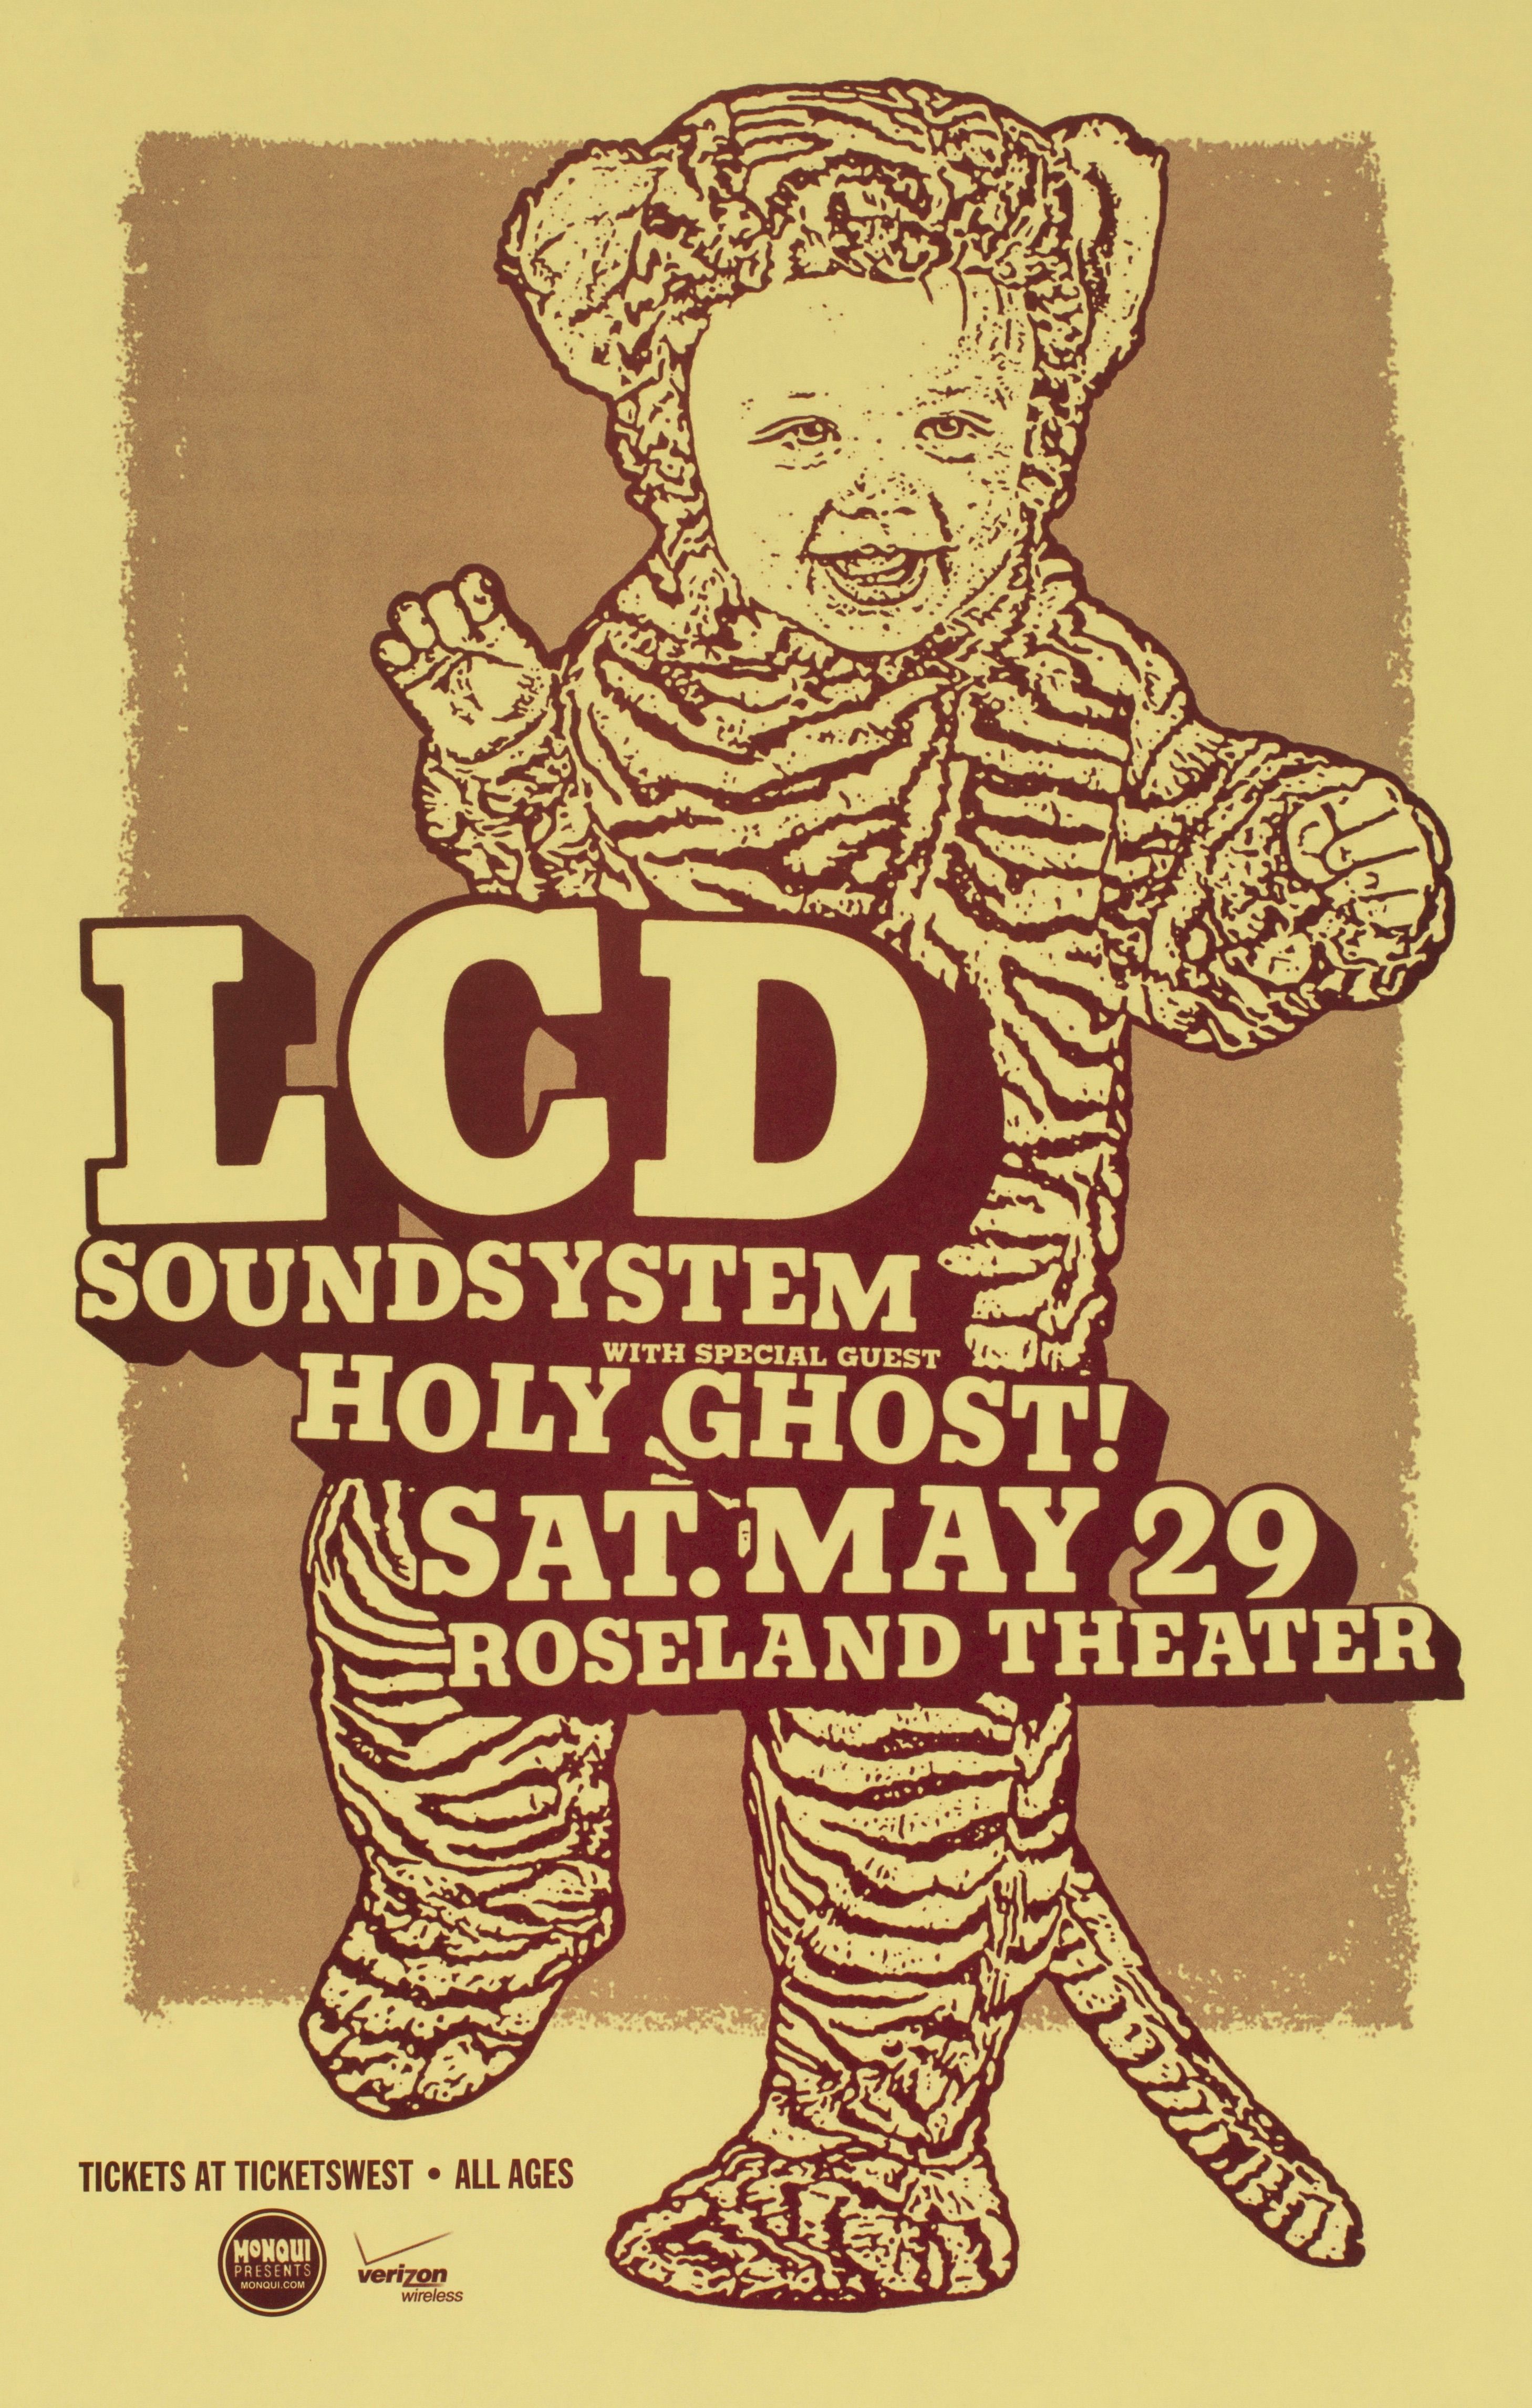 MXP-72.3 Lcd Soundsystem 2010 Roseland Theater  May 29 Concert Poster